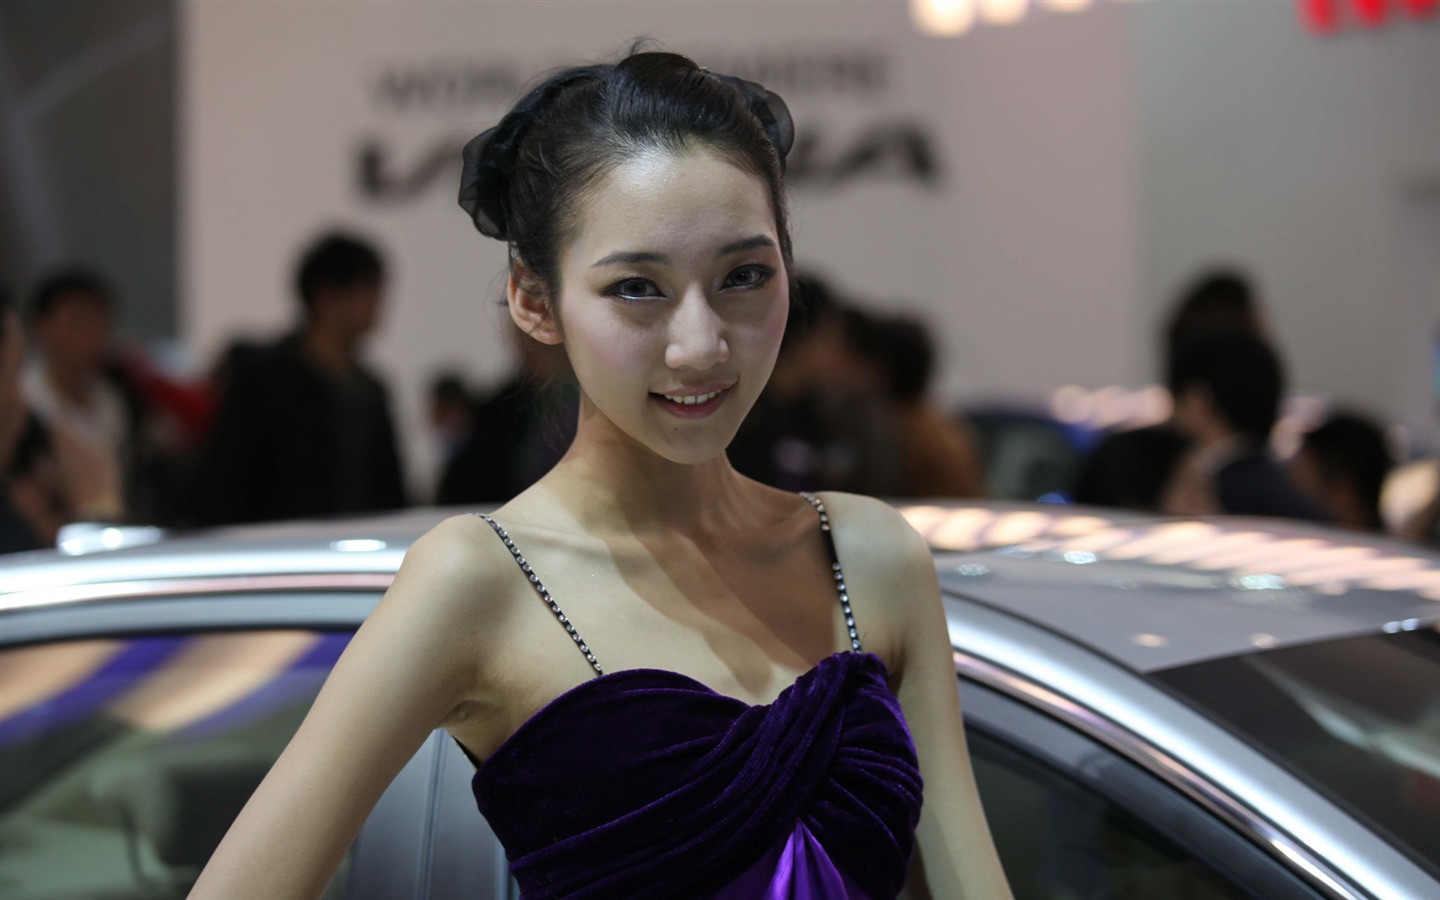 2010 Beijing International Auto Show beauty (1) (the wind chasing the clouds works) #21 - 1440x900